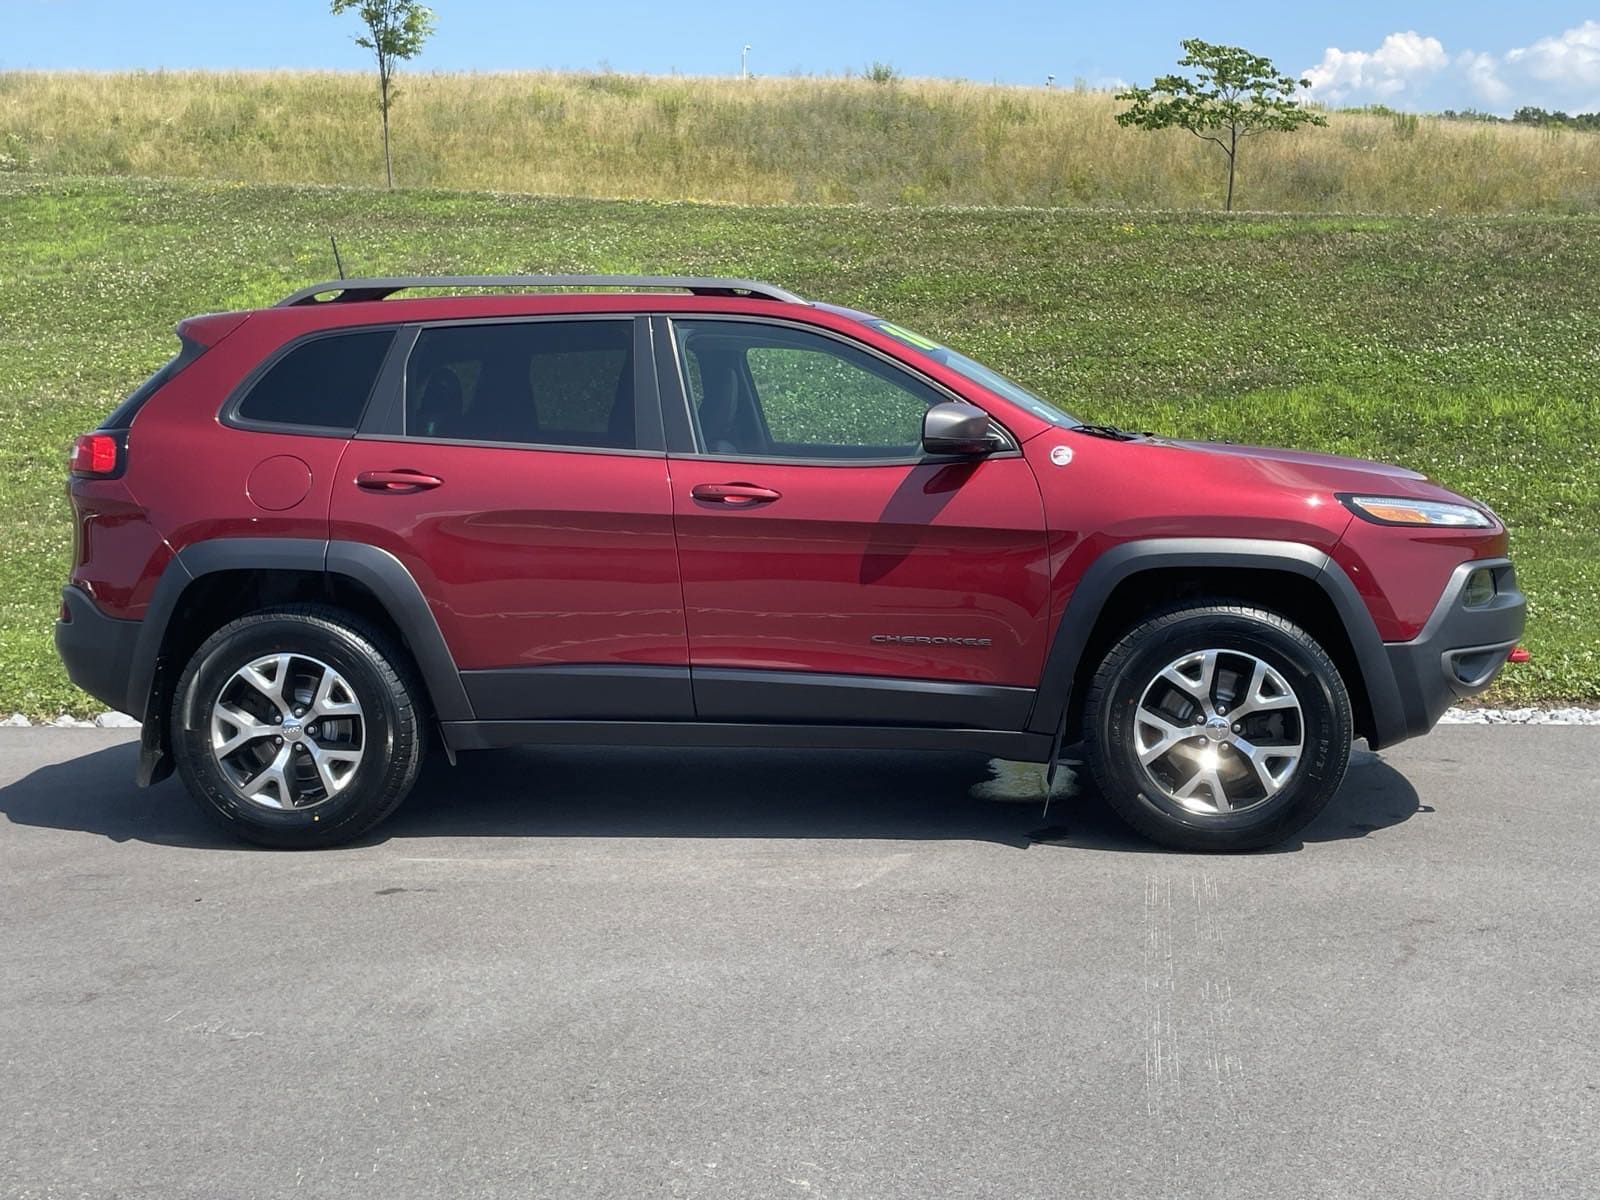 Used 2016 Jeep Cherokee Trailhawk with VIN 1C4PJMBS4GW123700 for sale in Muncy, PA